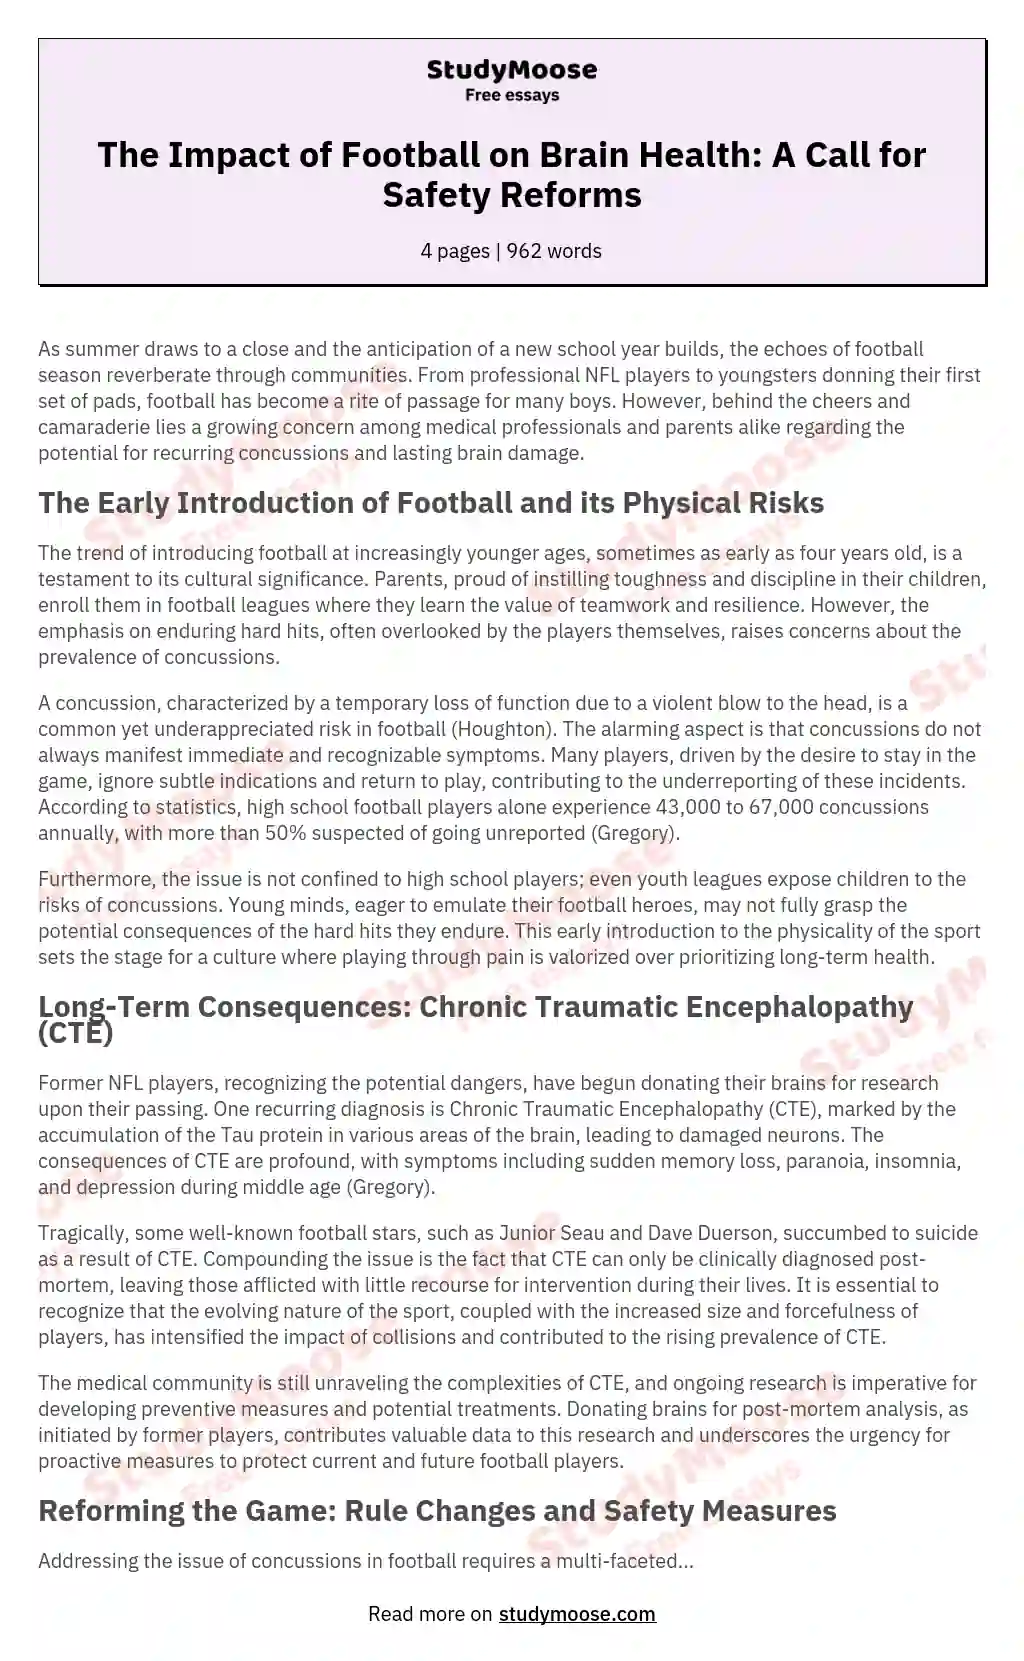 Concussions and Football